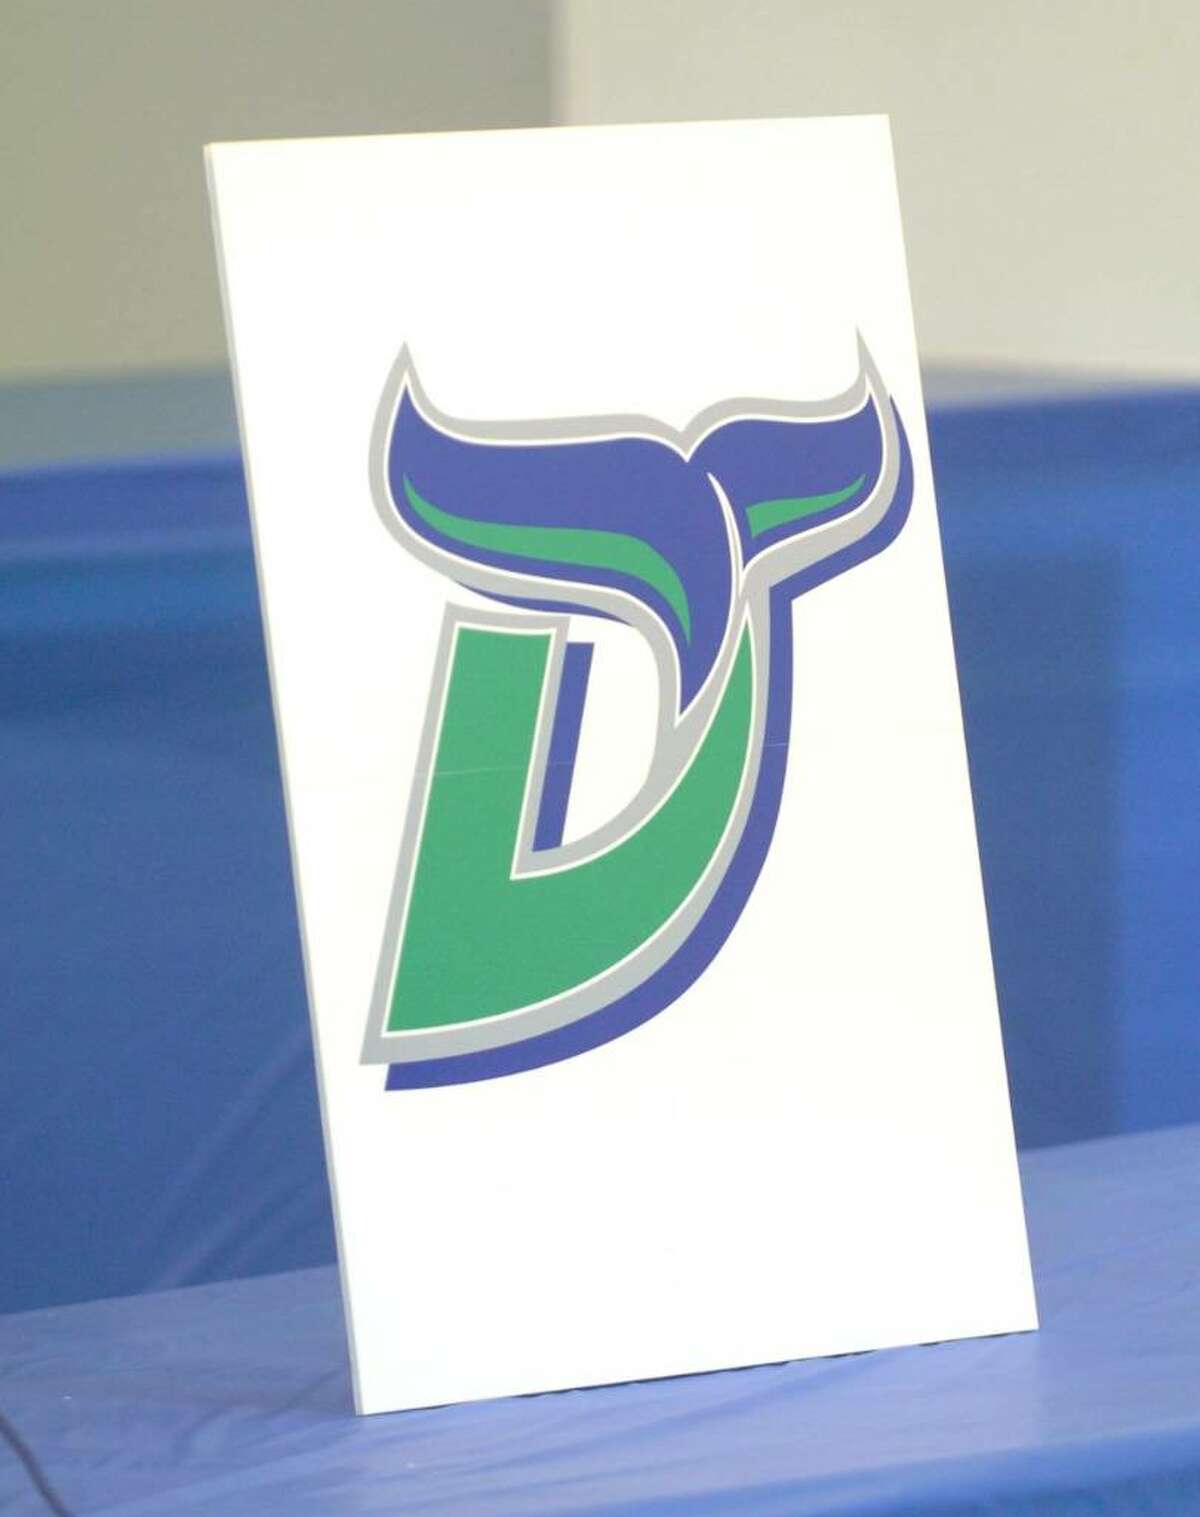 Logos presented at a press confrence for the Danbury Whalers at the Danbury Ice Arena Tuesday, Dec. 29, 2009.